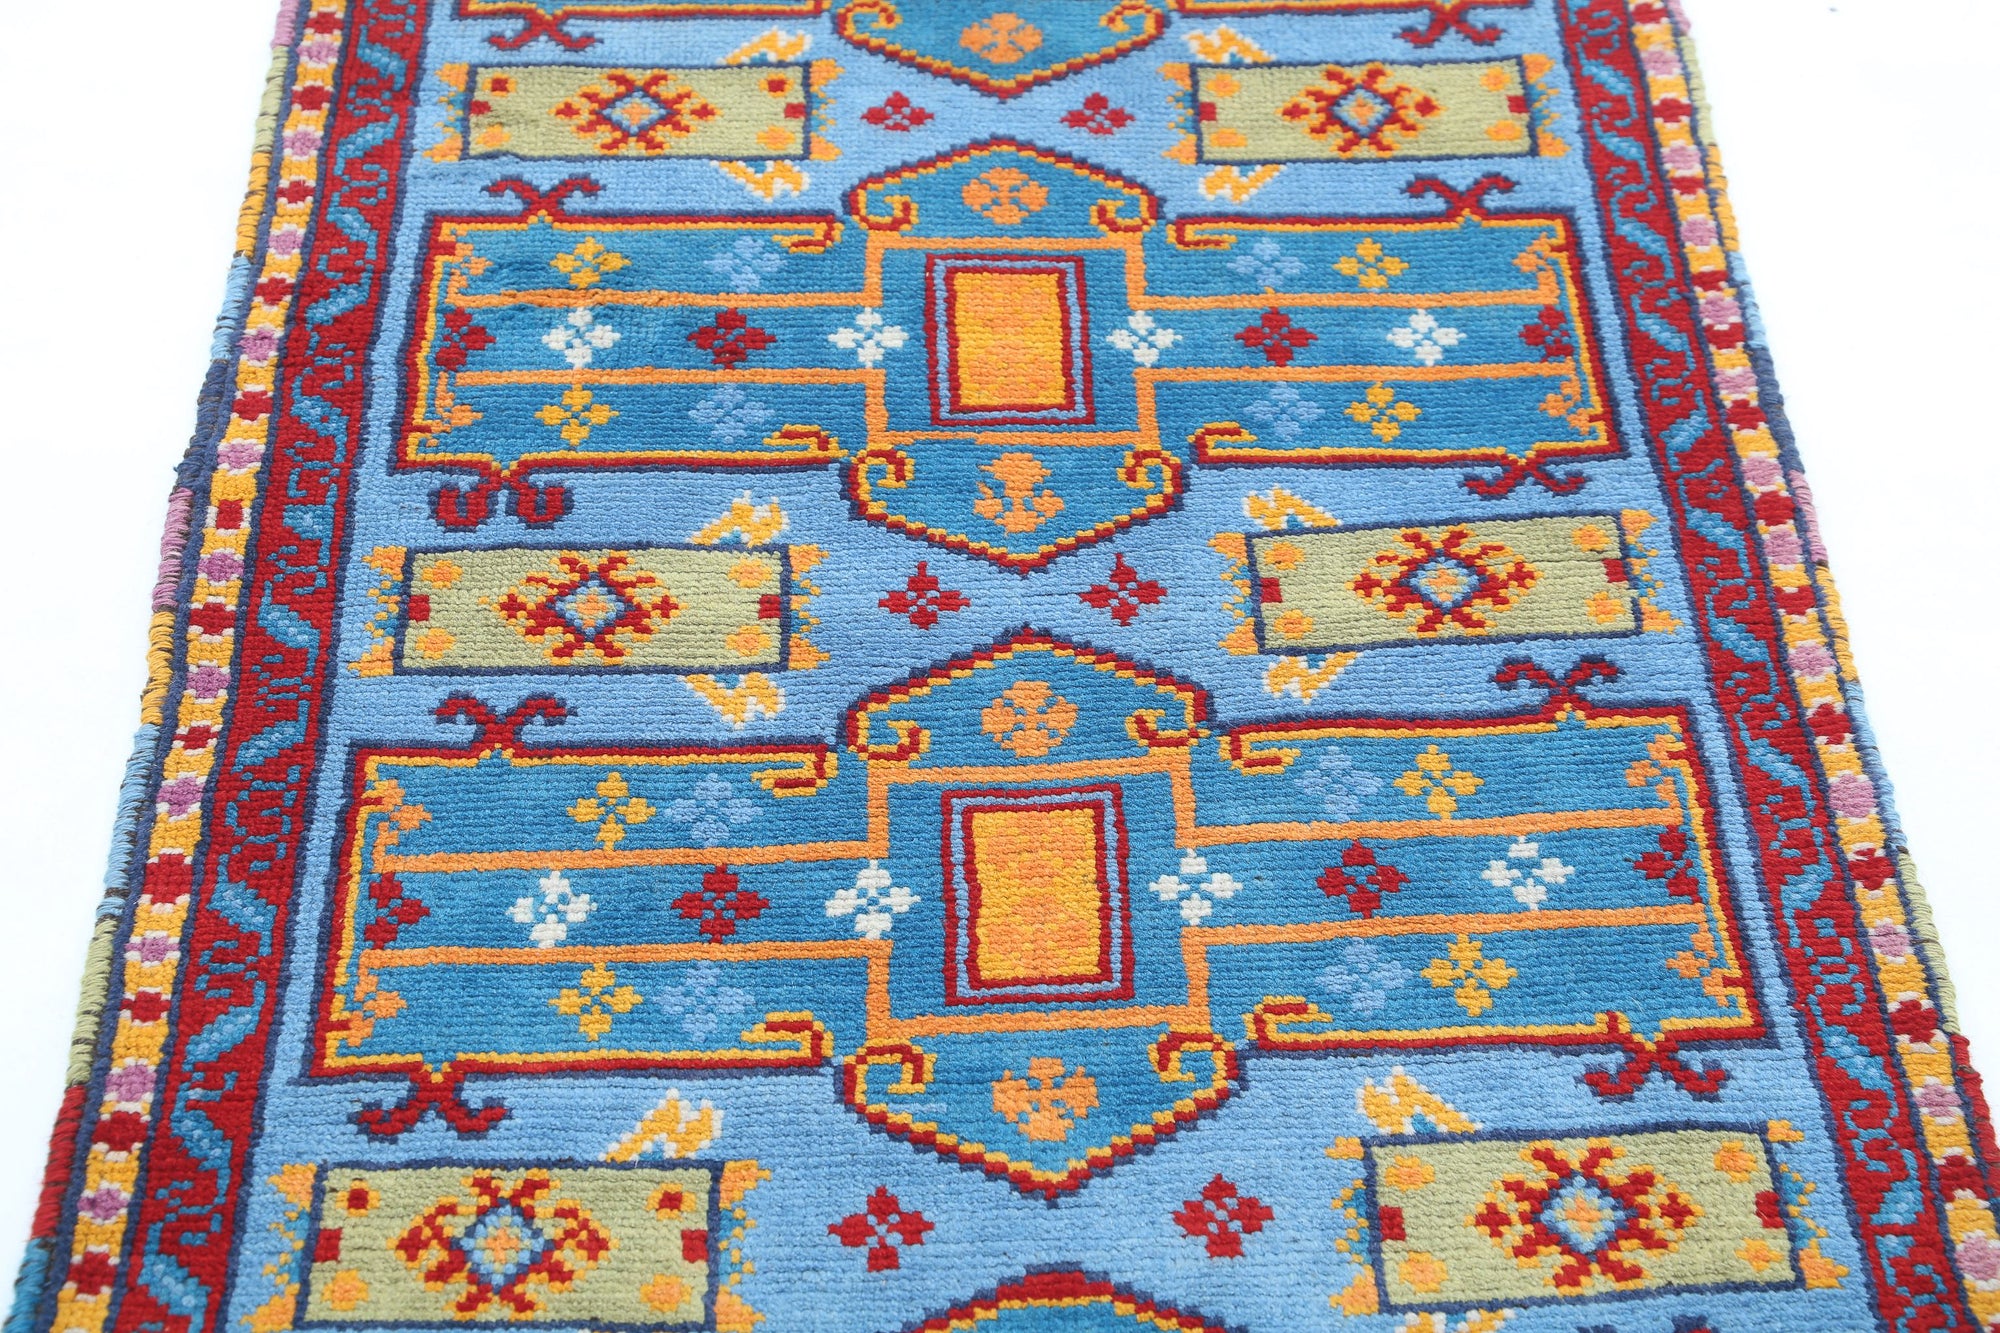 Revival-hand-knotted-qarghani-wool-rug-5014019-4.jpg